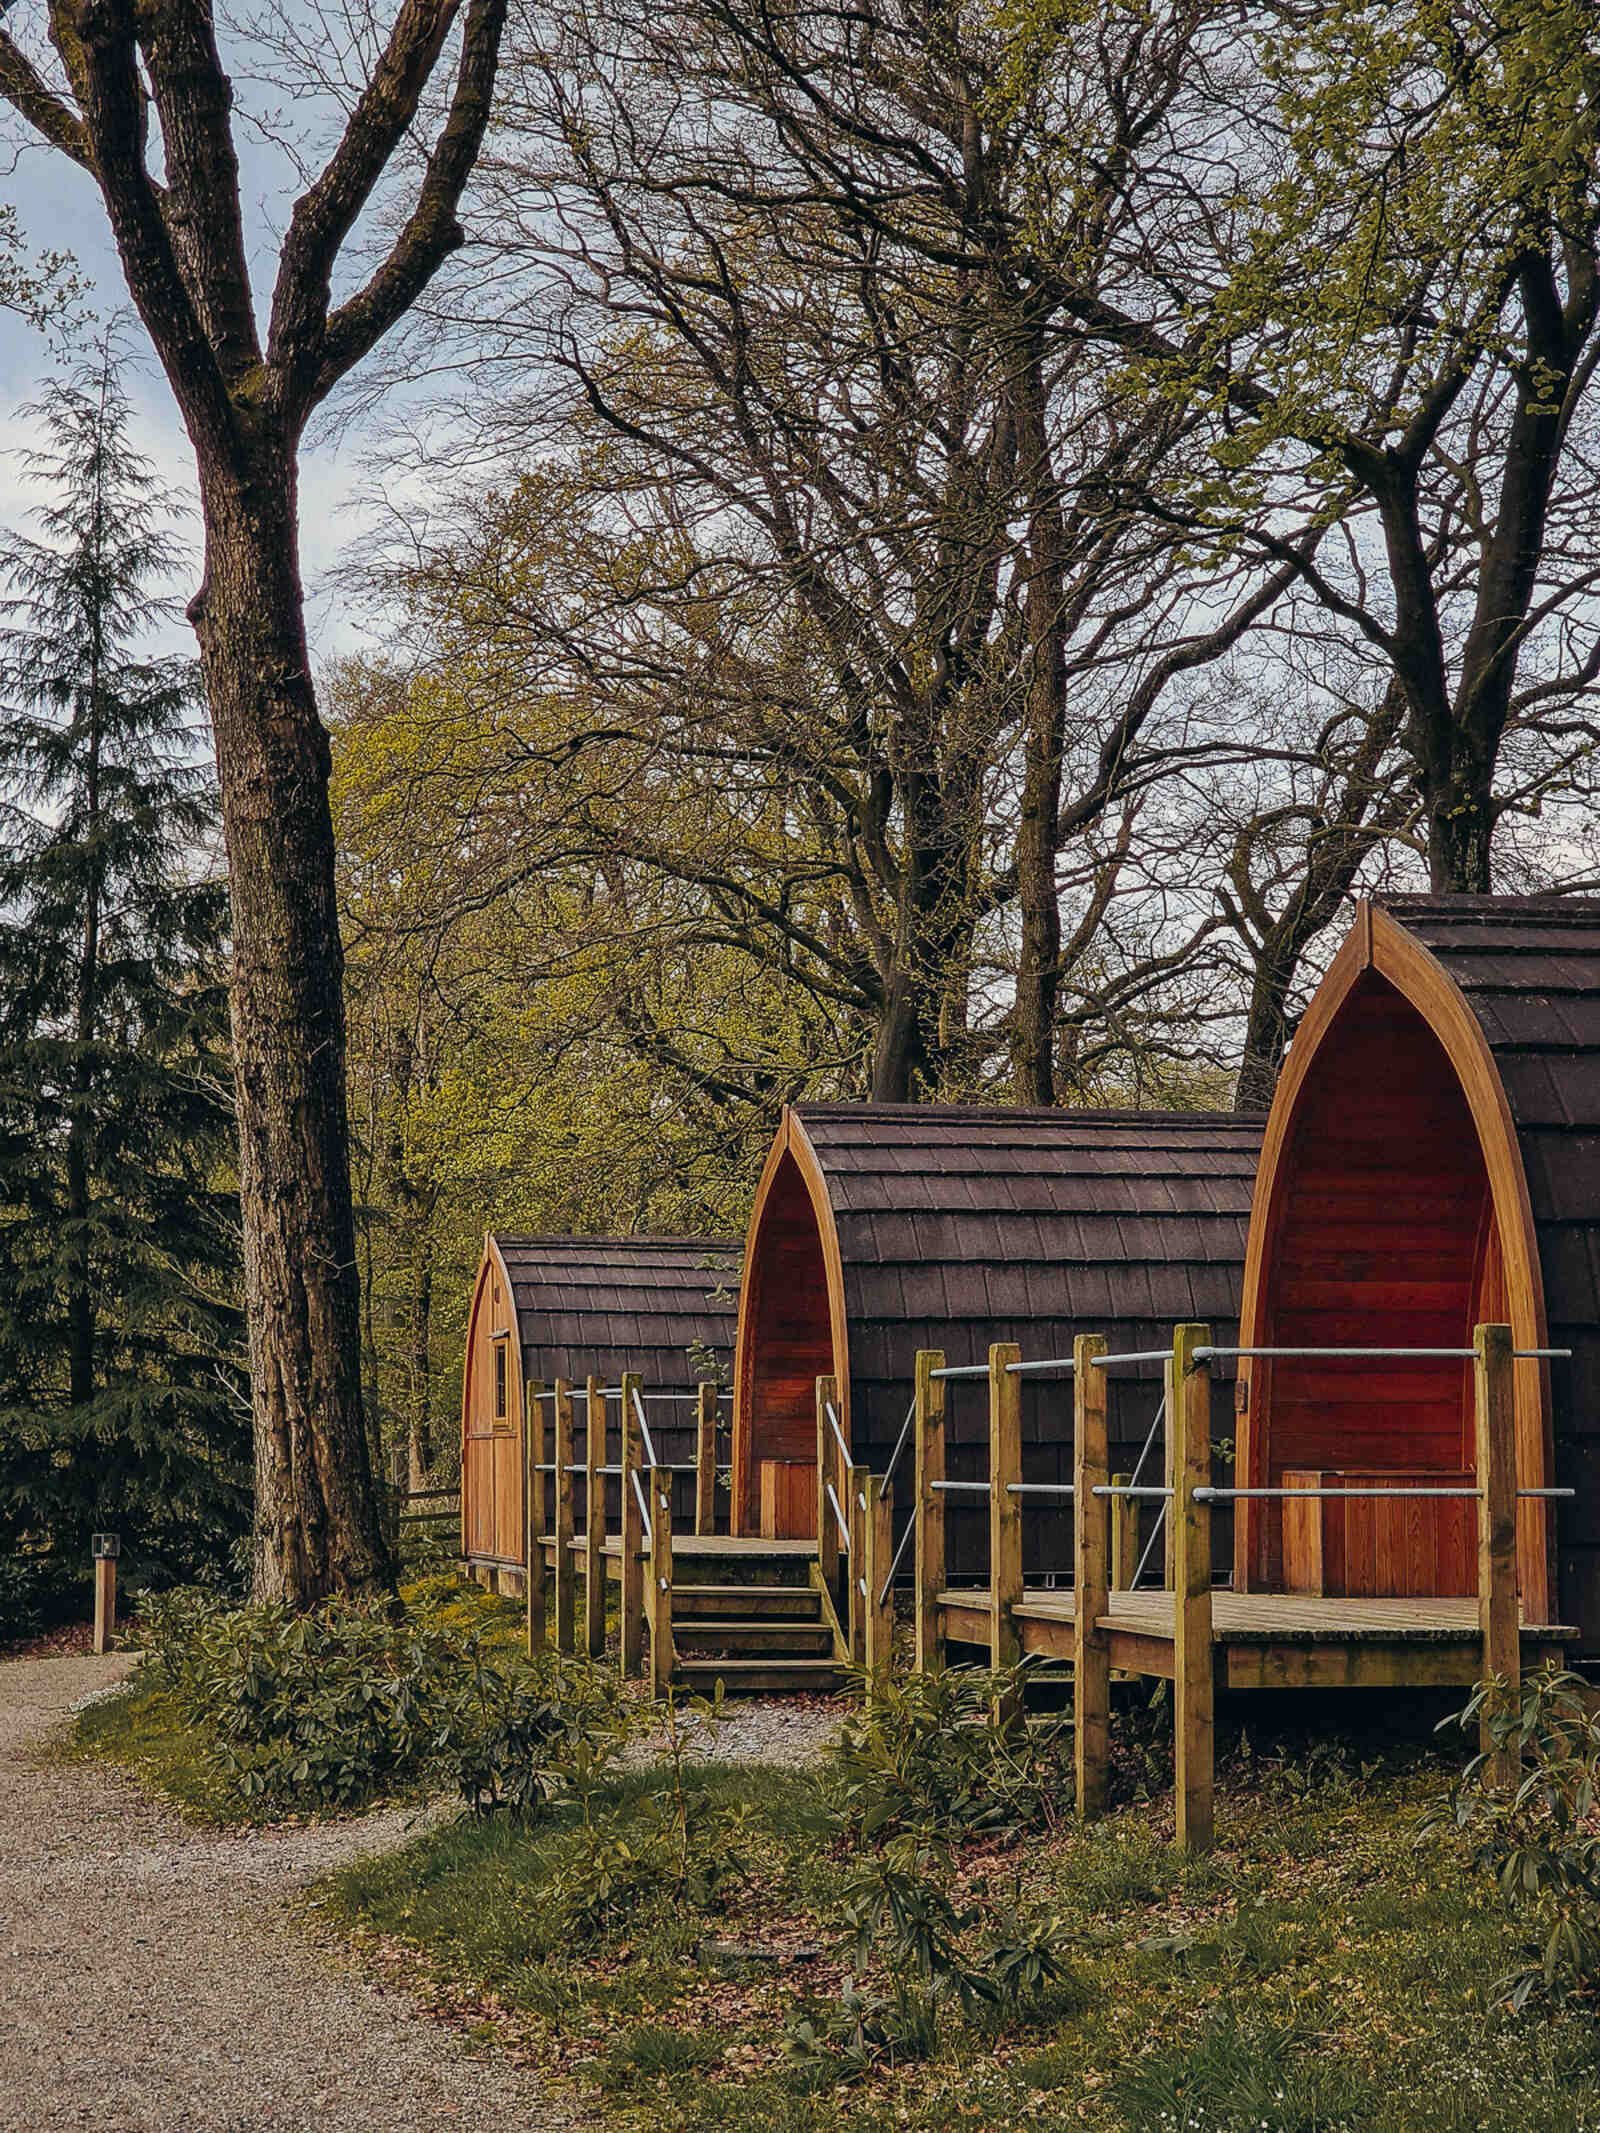 three unique wooden huts for accommodation in forest of bowland